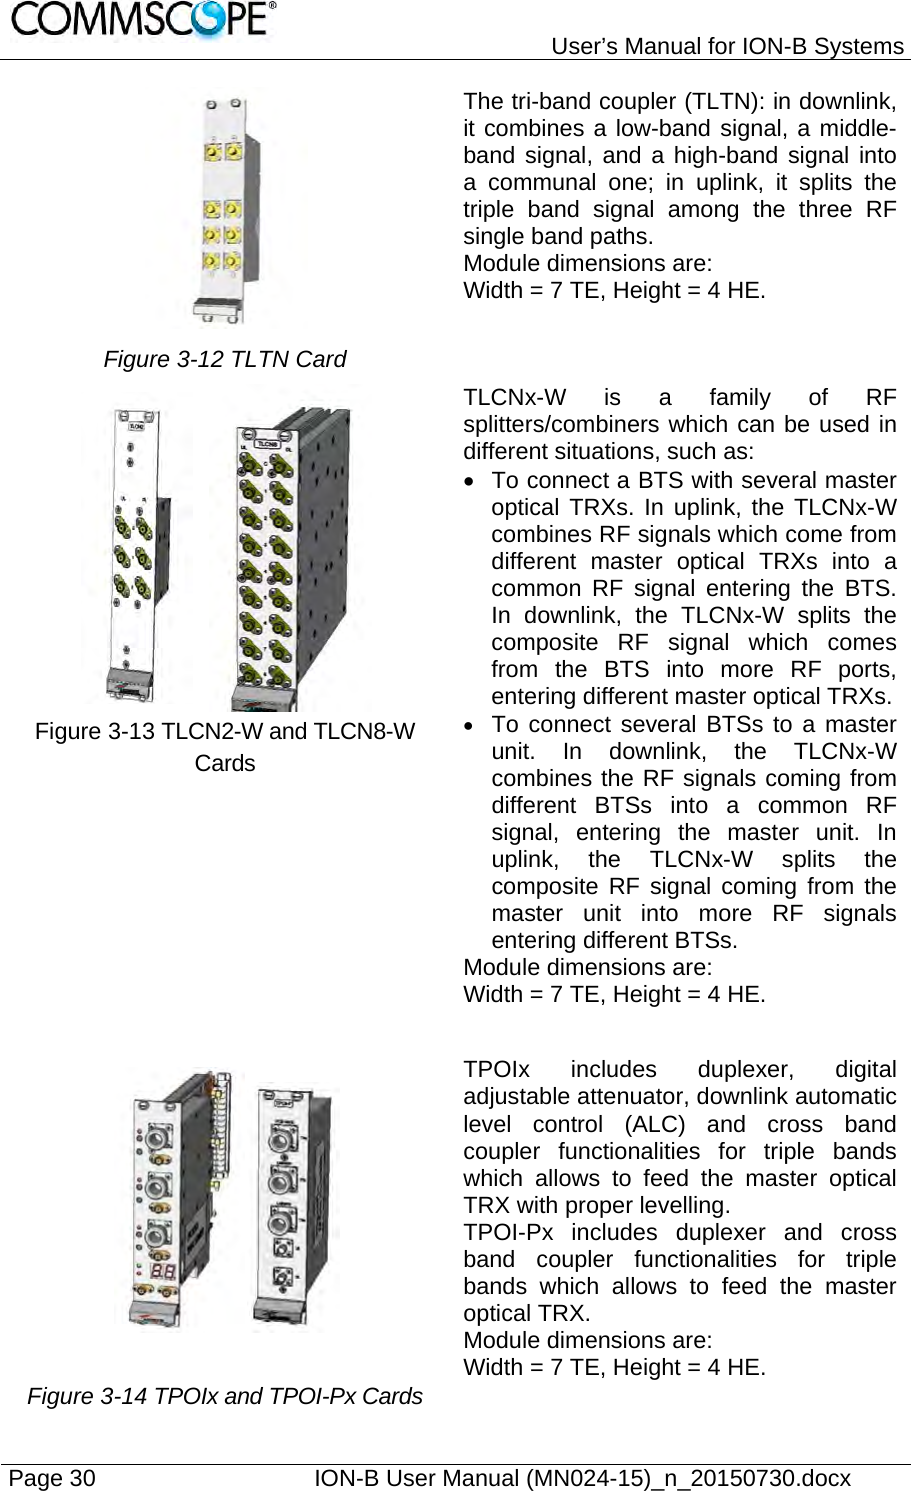   User’s Manual for ION-B Systems Page 30    ION-B User Manual (MN024-15)_n_20150730.docx   The tri-band coupler (TLTN): in downlink, it combines a low-band signal, a middle-band signal, and a high-band signal into a communal one; in uplink, it splits the triple band signal among the three RF single band paths.  Module dimensions are:  Width = 7 TE, Height = 4 HE. Figure 3-12 TLTN Card     TLCNx-W is a family of RF splitters/combiners which can be used in different situations, such as:   To connect a BTS with several master optical TRXs. In uplink, the TLCNx-W combines RF signals which come from different master optical TRXs into a common RF signal entering the BTS. In downlink, the TLCNx-W splits the composite RF signal which comes from the BTS into more RF ports, entering different master optical TRXs.  To connect several BTSs to a master unit. In downlink, the TLCNx-W combines the RF signals coming from different BTSs into a common RF signal, entering the master unit. In uplink, the TLCNx-W splits the composite RF signal coming from the master unit into more RF signals entering different BTSs. Module dimensions are: Width = 7 TE, Height = 4 HE. Figure 3-13 TLCN2-W and TLCN8-W Cards     Figure 3-14 TPOIx and TPOI-Px Cards  TPOIx includes duplexer, digital adjustable attenuator, downlink automatic level control (ALC) and cross band coupler functionalities for triple bands which allows to feed the master optical TRX with proper levelling.  TPOI-Px includes duplexer and cross band coupler functionalities for triple bands which allows to feed the master optical TRX. Module dimensions are:  Width = 7 TE, Height = 4 HE. 